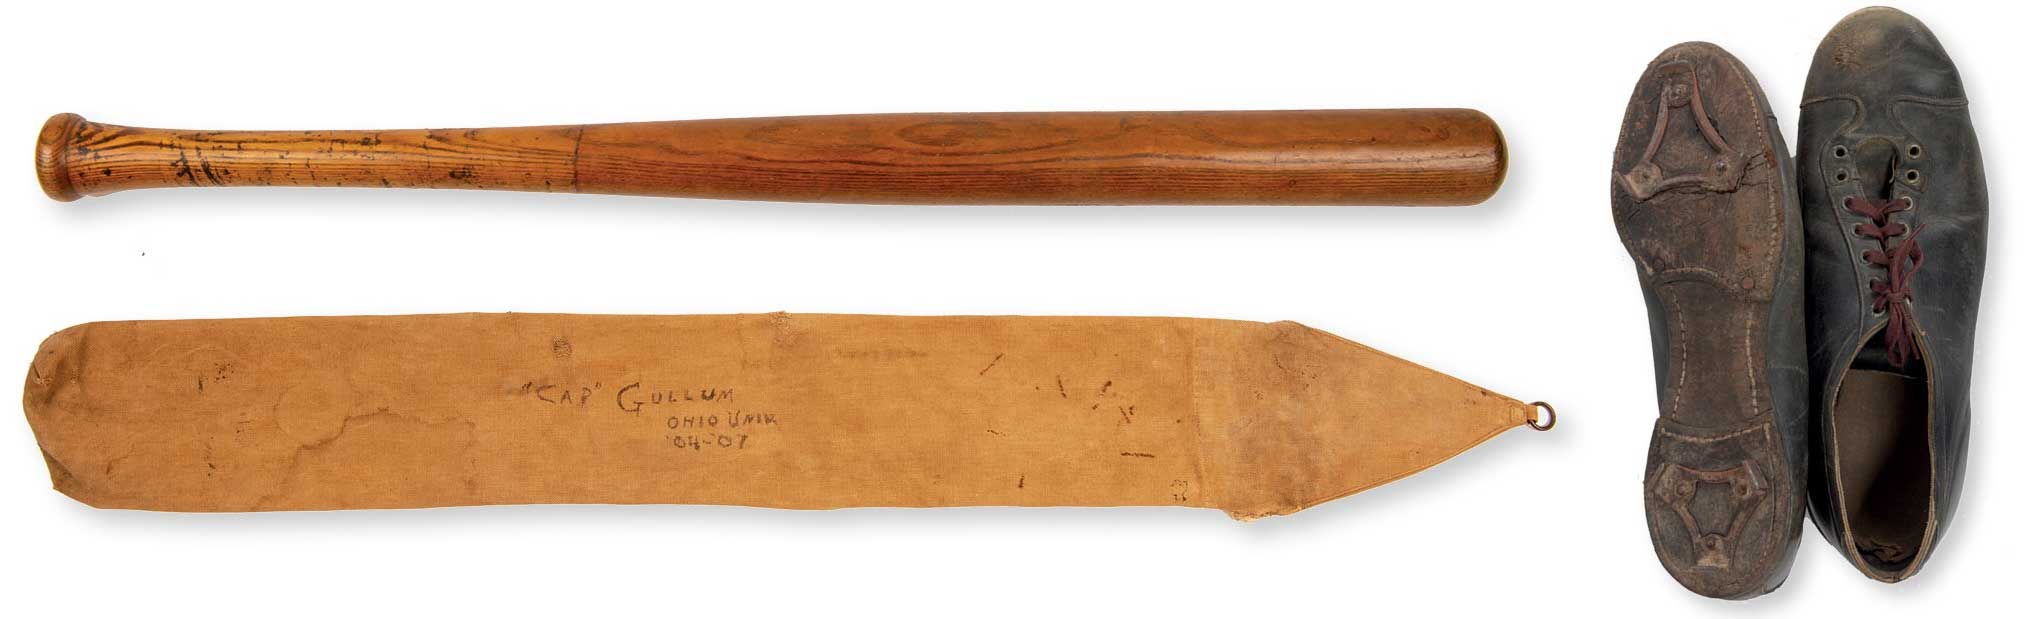 OHIO baseball captain Frank “Cap” Gullem’s bat, unique carrying case, and his shoes, complete with ominous-looking metal cleats. 